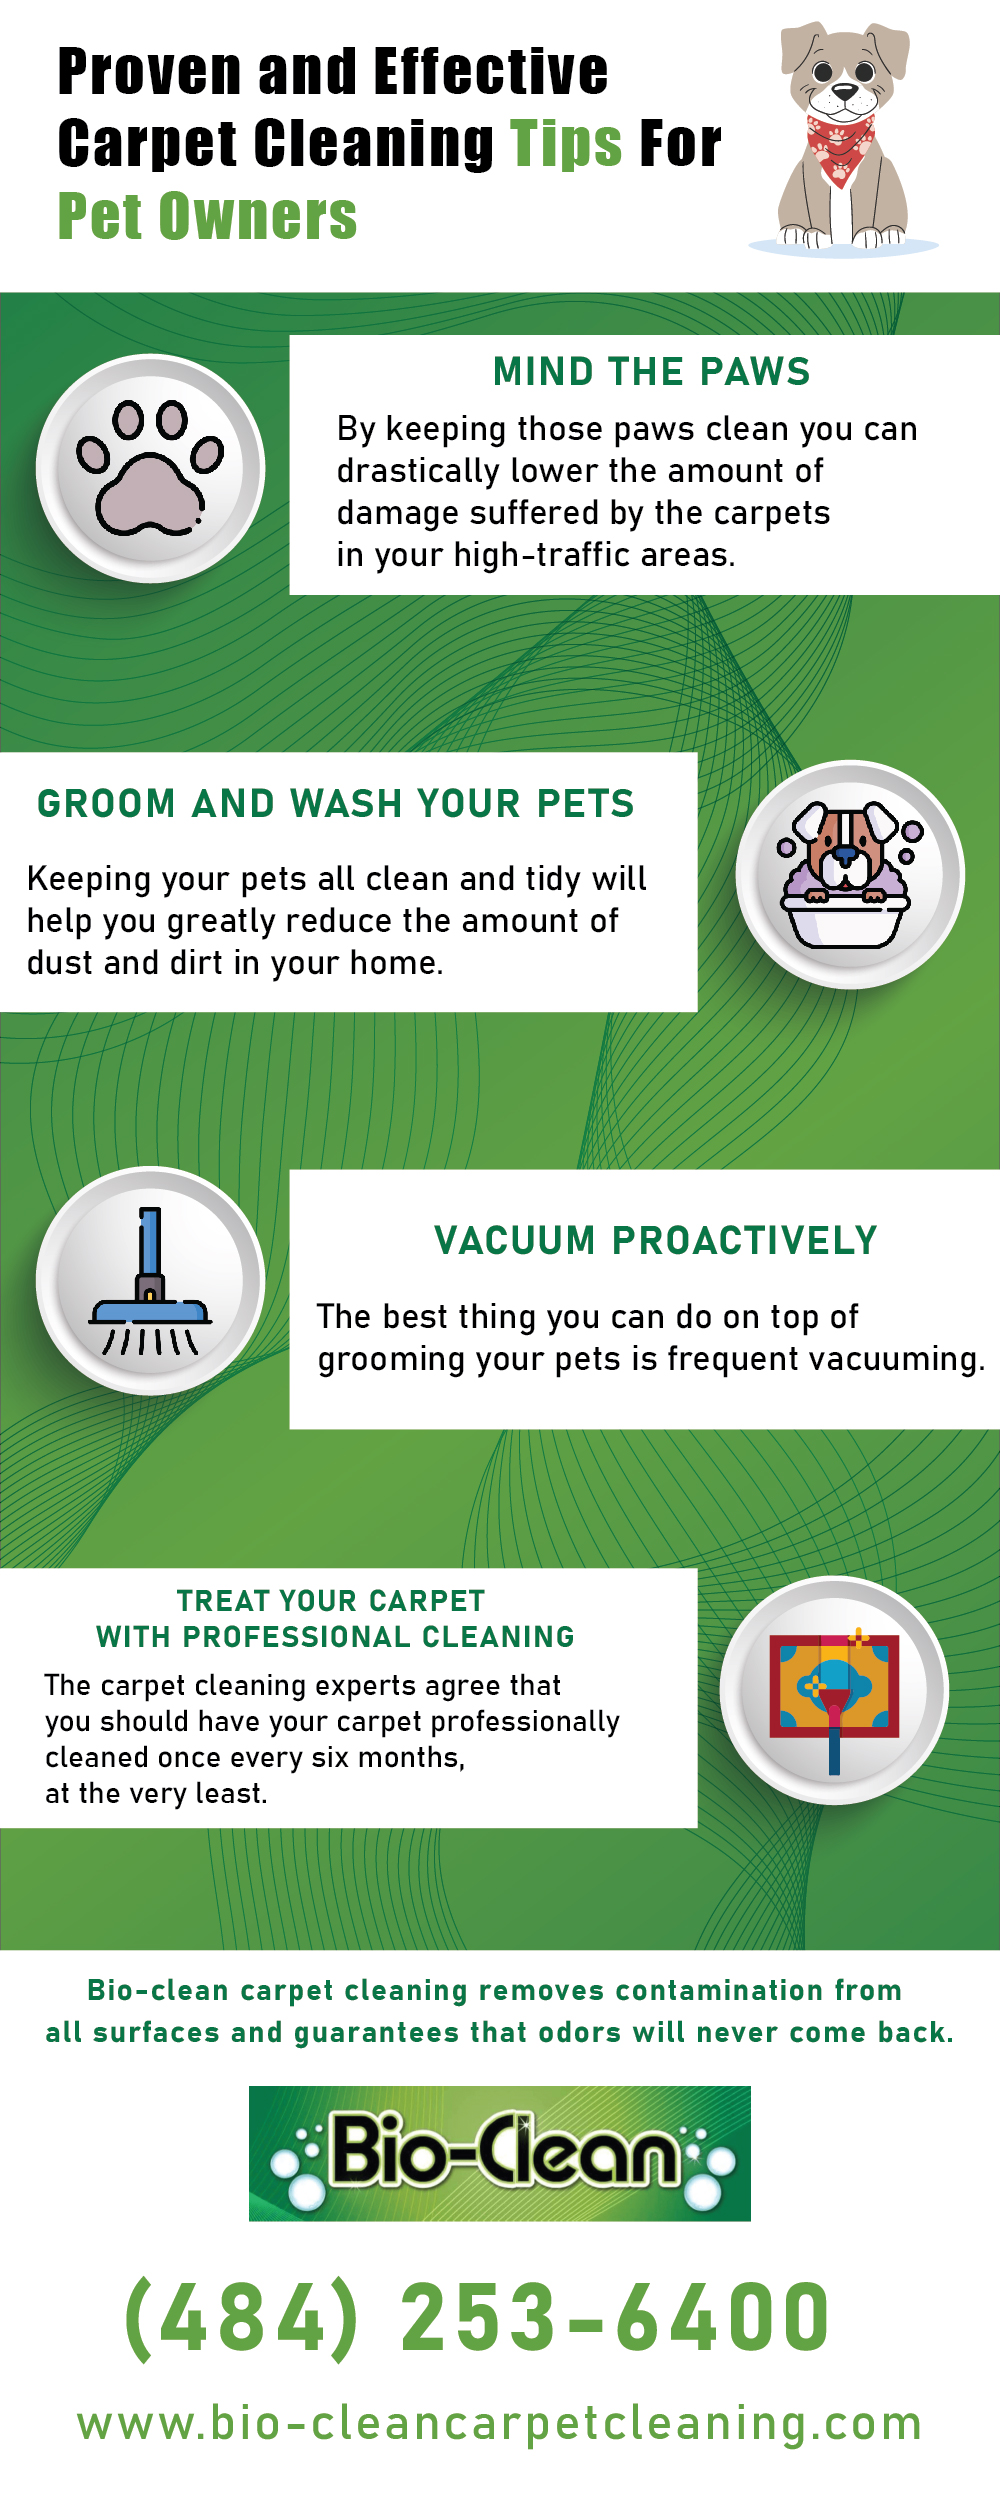 Effective Carpet Cleaning Tips For Pet Owners [Infographic]